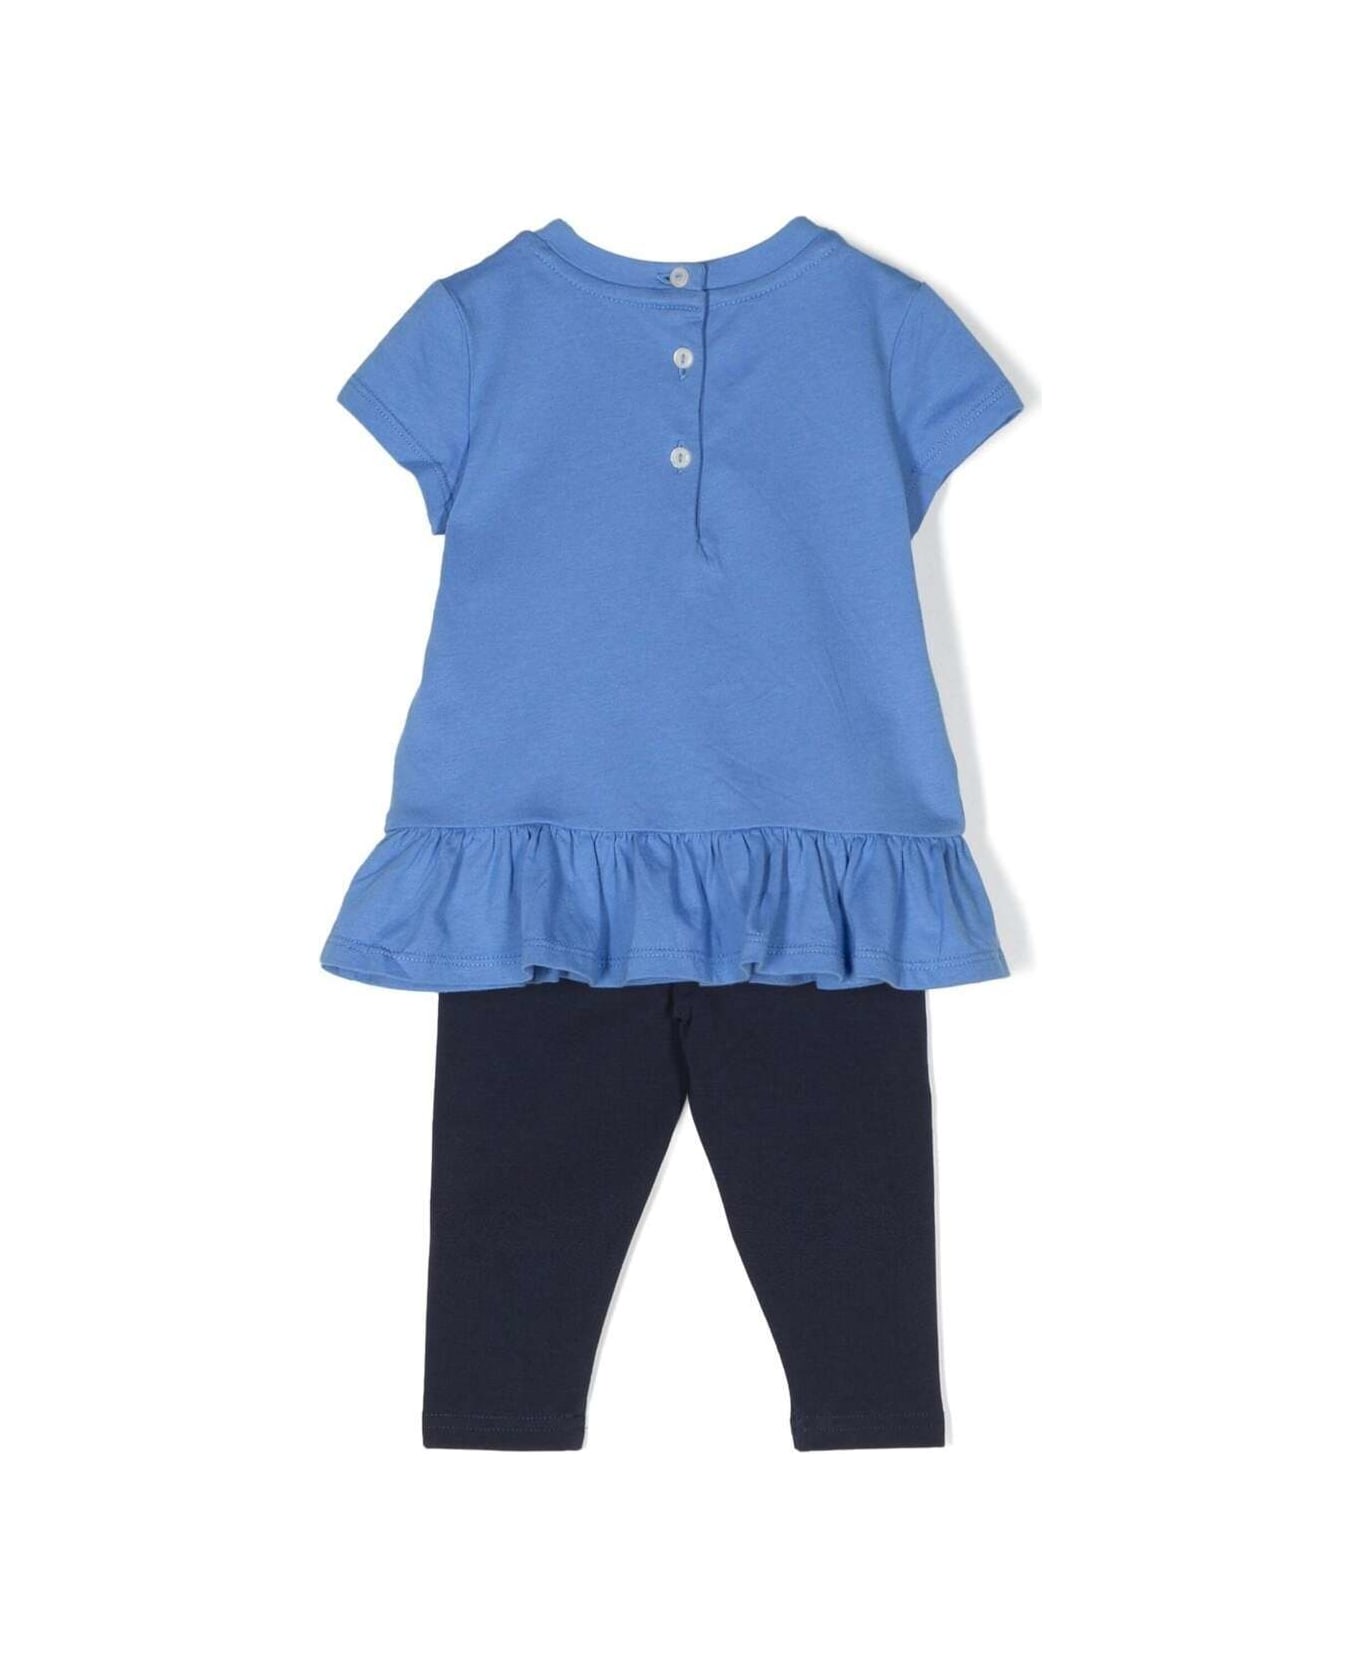 Polo Ralph Lauren Blue And Black Set With Top And Leggings With Teddy Bear Print In Cotton Baby - Blu